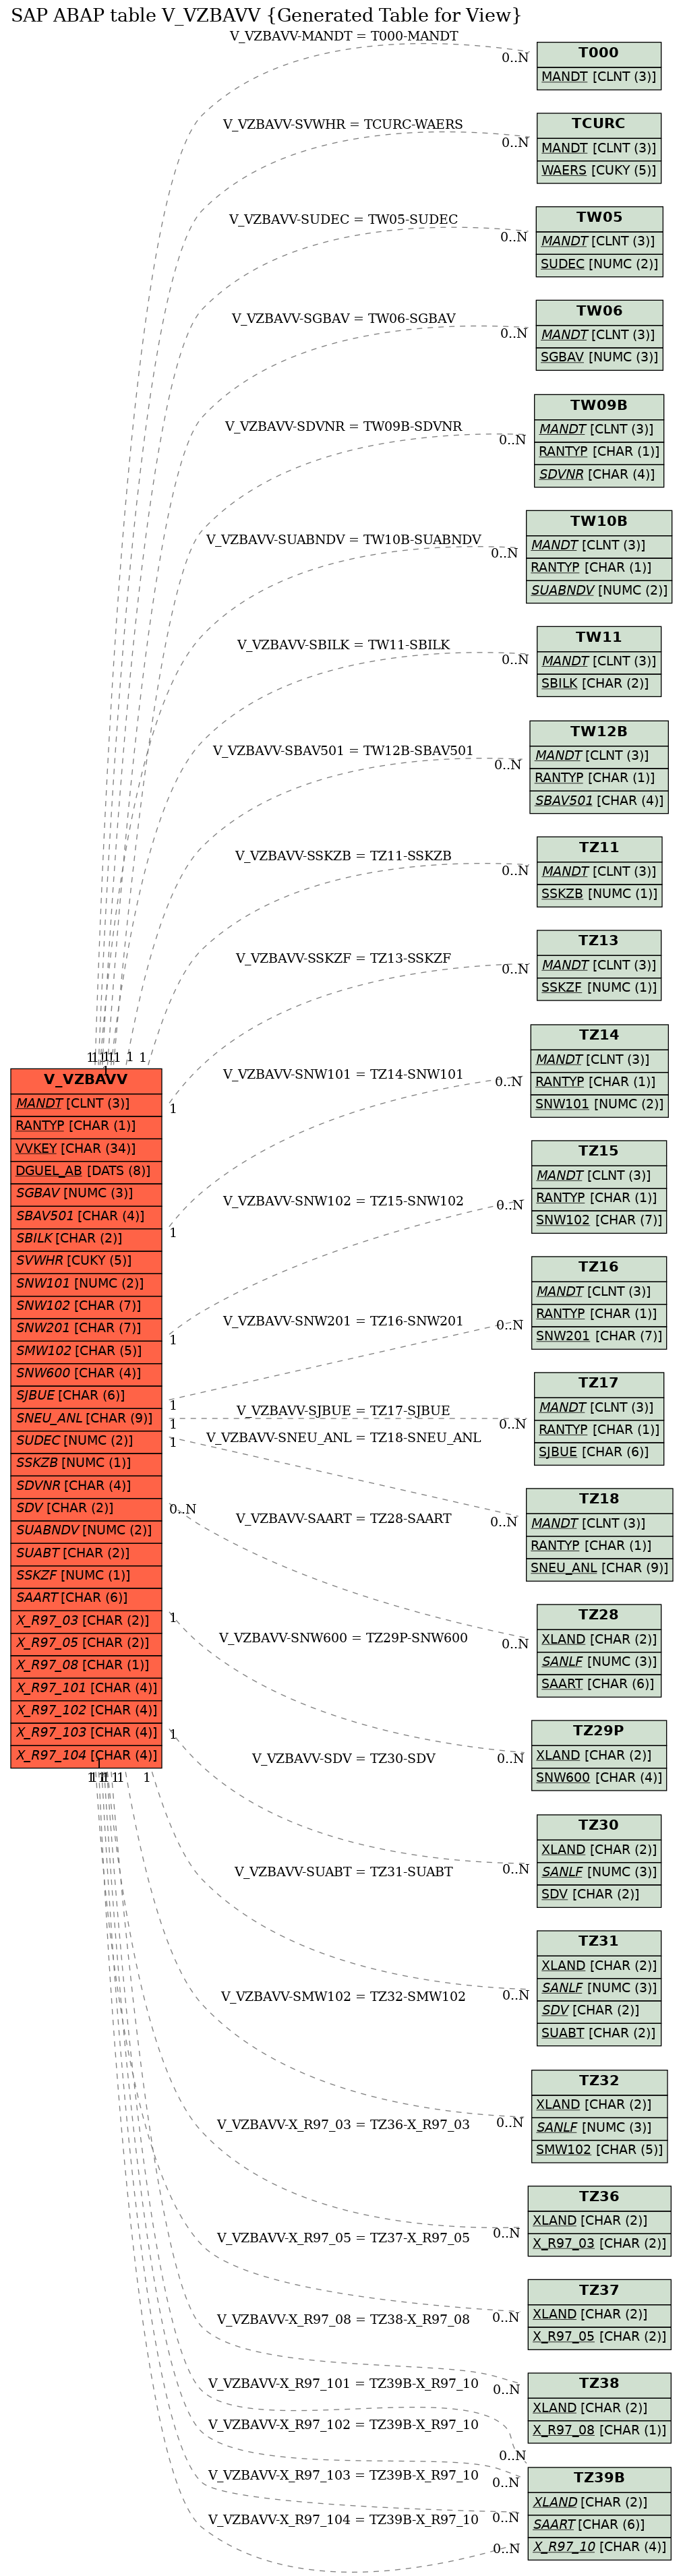 E-R Diagram for table V_VZBAVV (Generated Table for View)